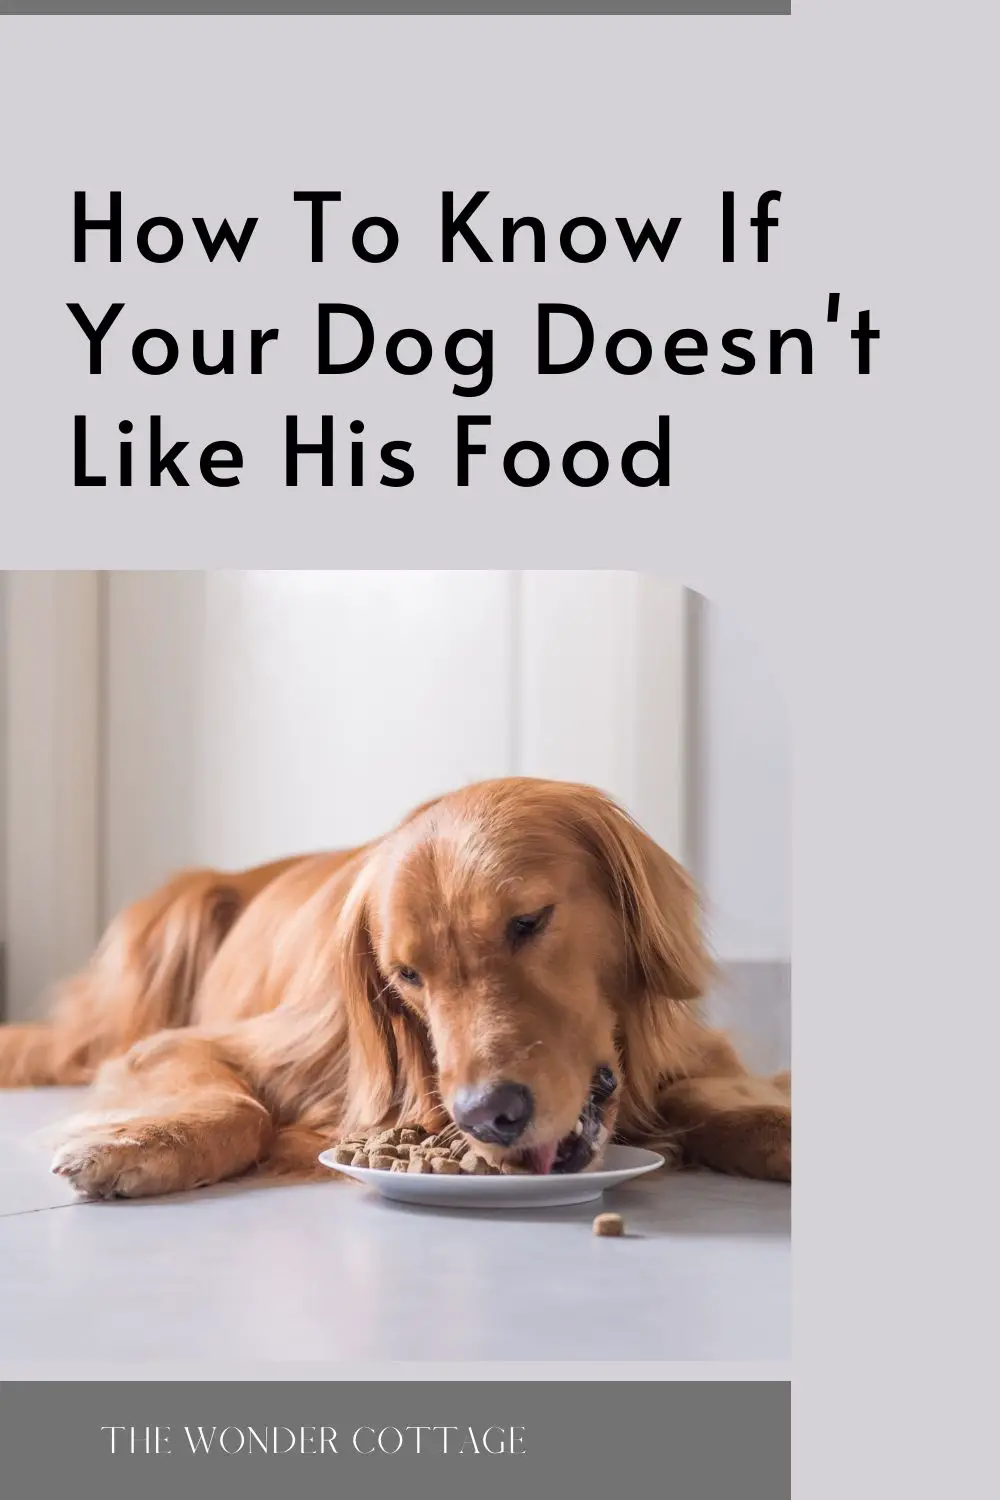 how to know if your dog doesn't like his food